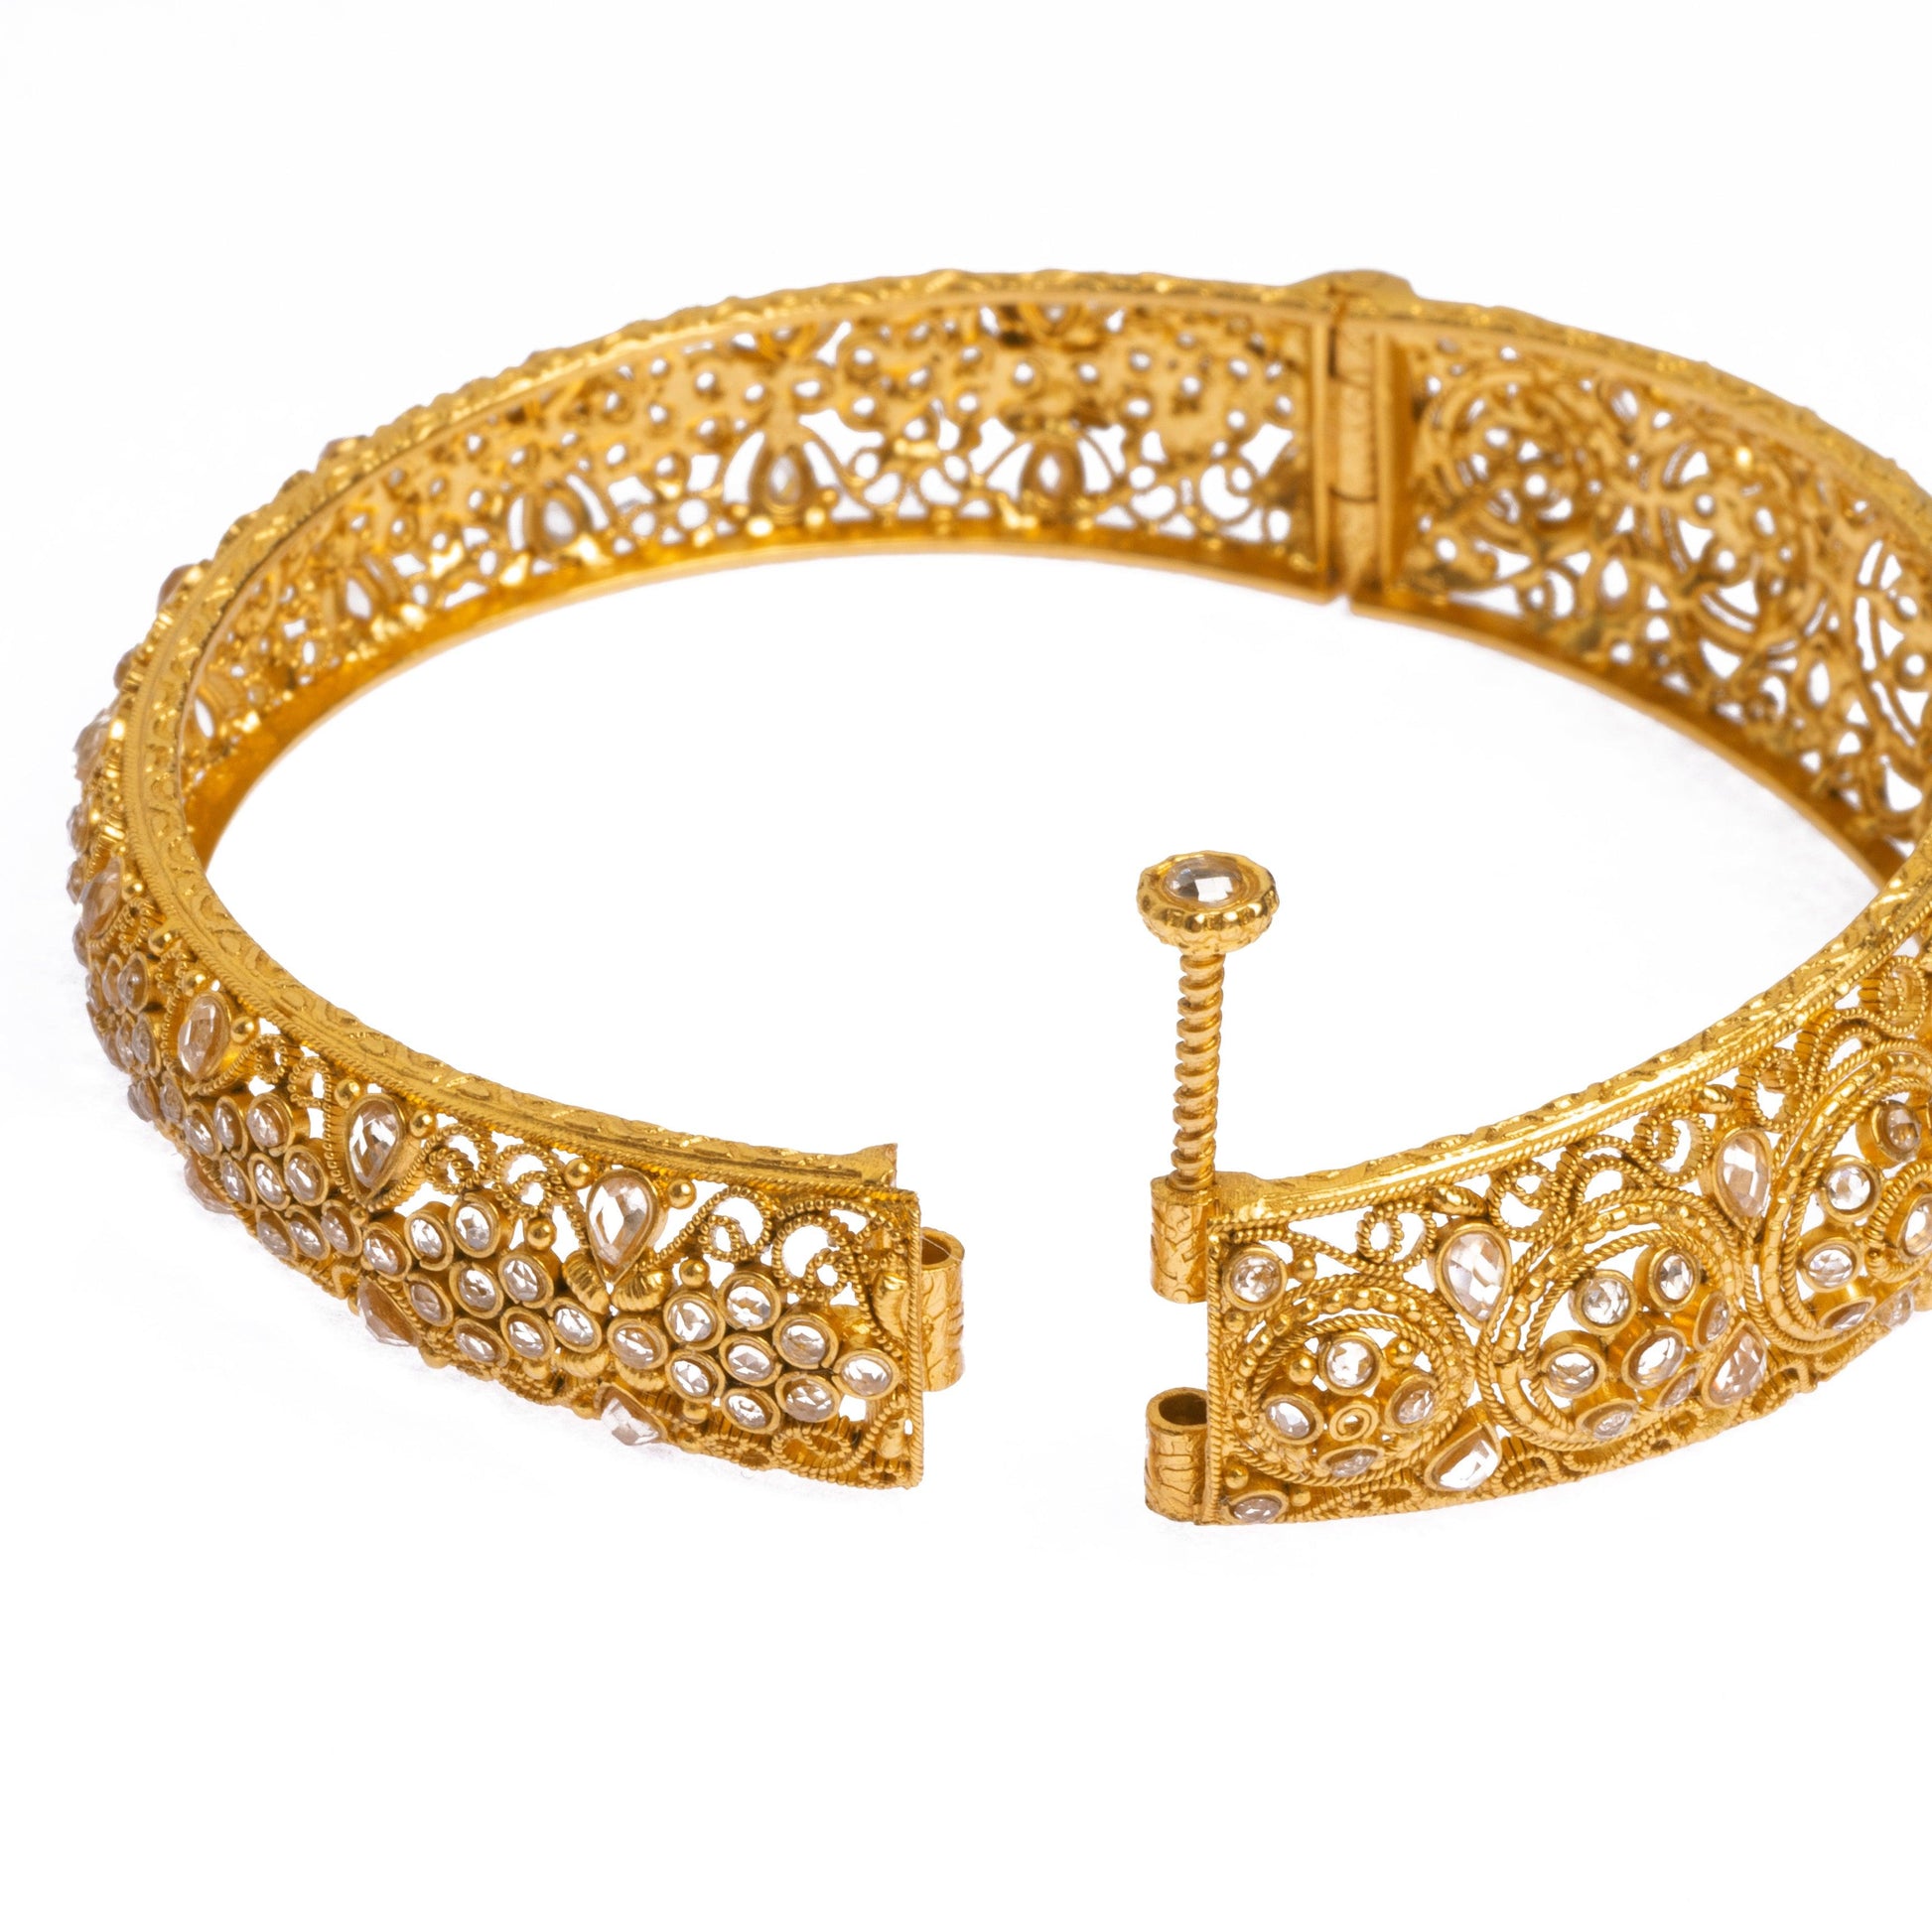 Pair of 22ct Gold Antiquated Look Openable Bangles with Polki Style Stones B-8288 - Minar Jewellers